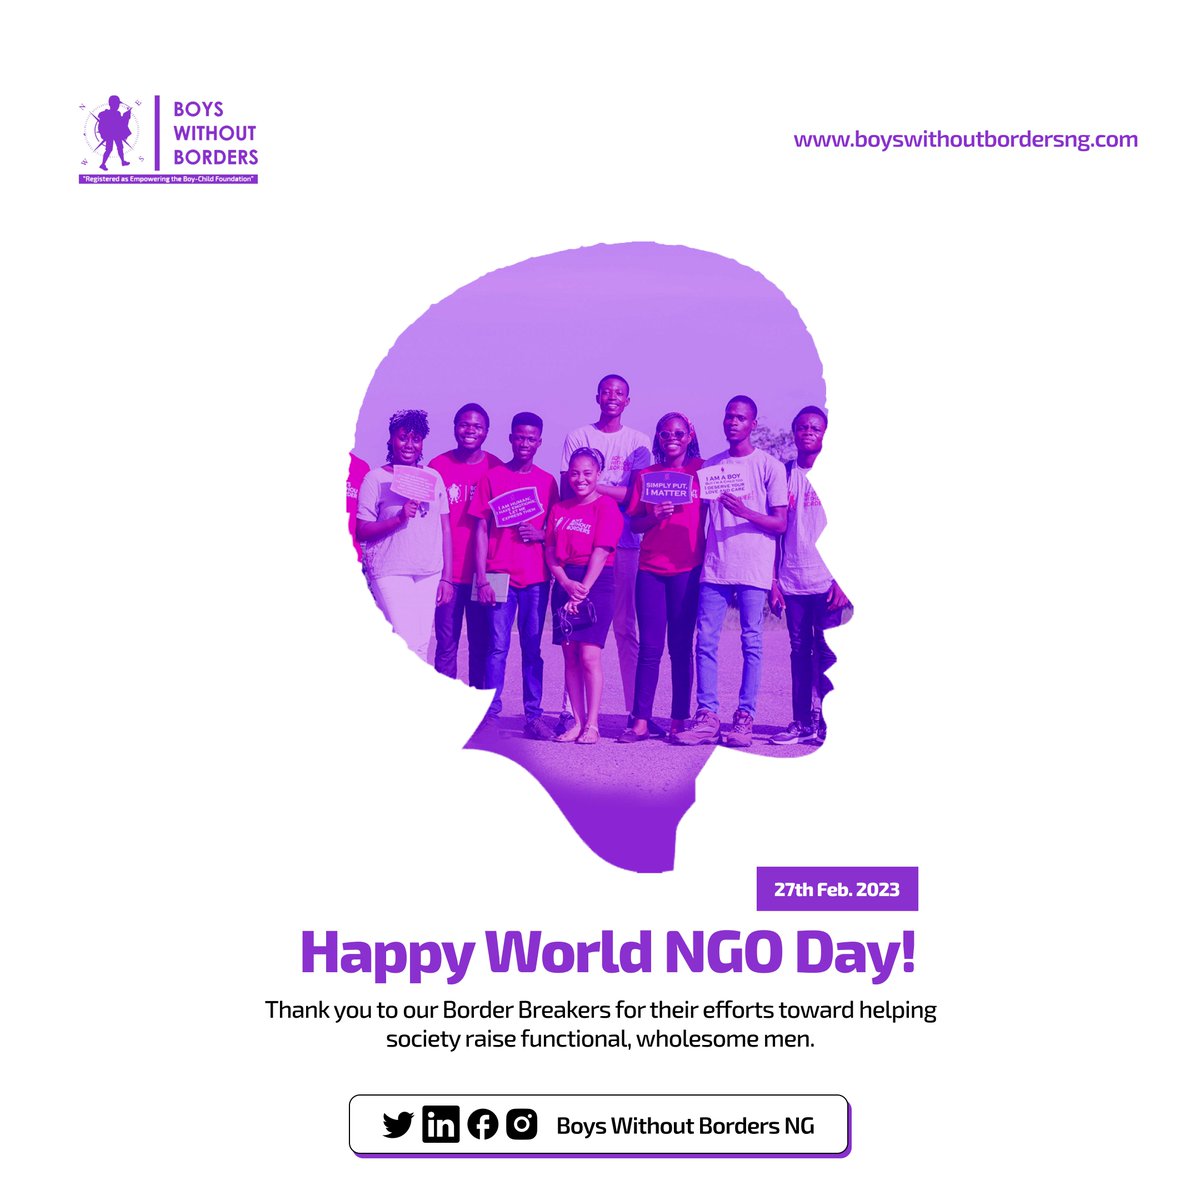 Happy World NGO Day 🤩!

At Boys Without Borders, we are grateful for the team of committed volunteers helping us champion our mission of supporting society to raise functional and wholesome men.

#worldngoday #BoysWithoutBordersNG #volunteering #volunteers